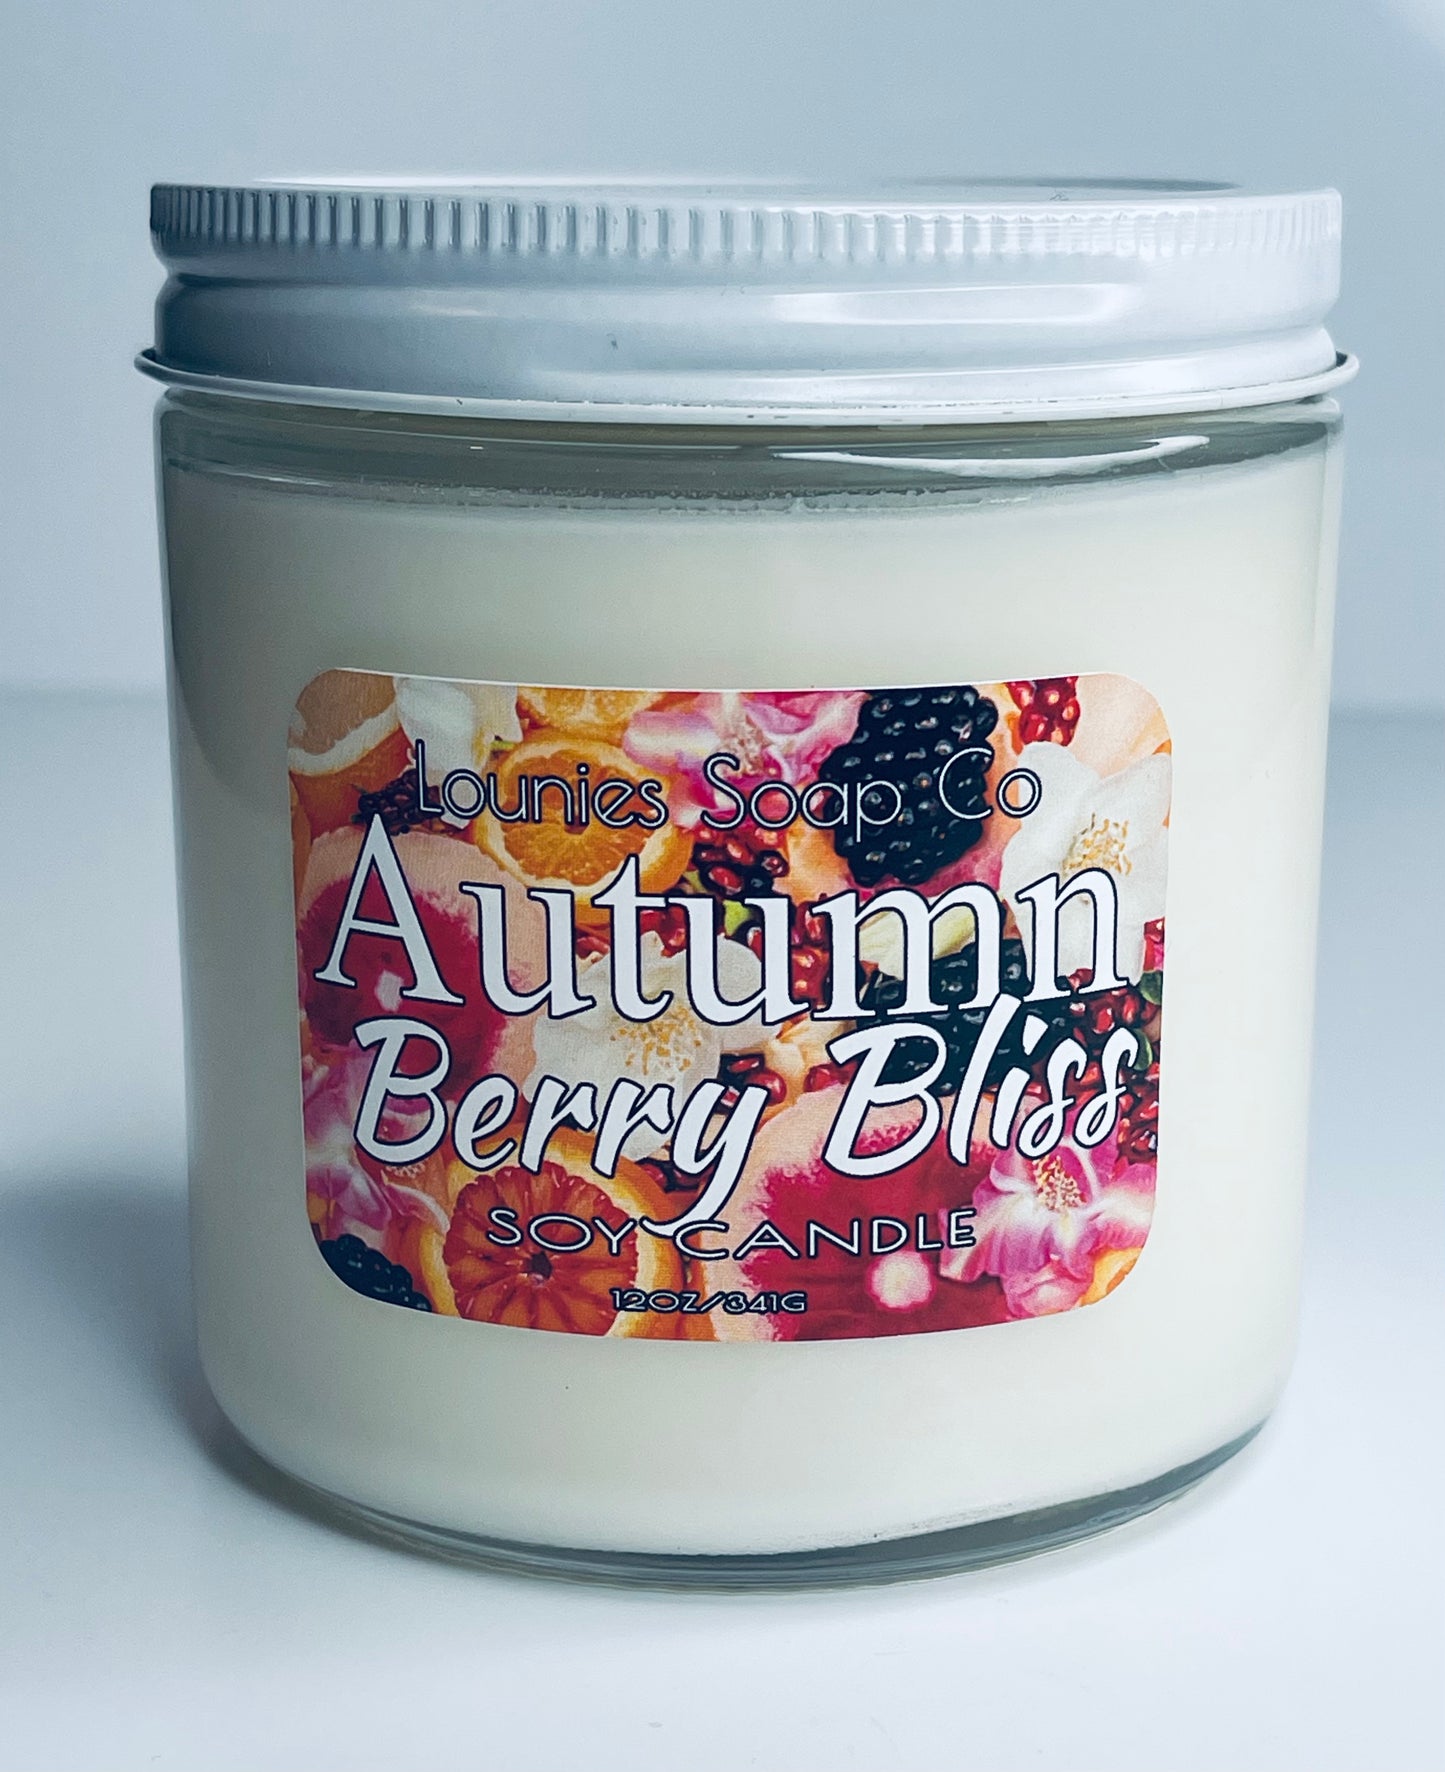 Autumn Berry Bliss Candle